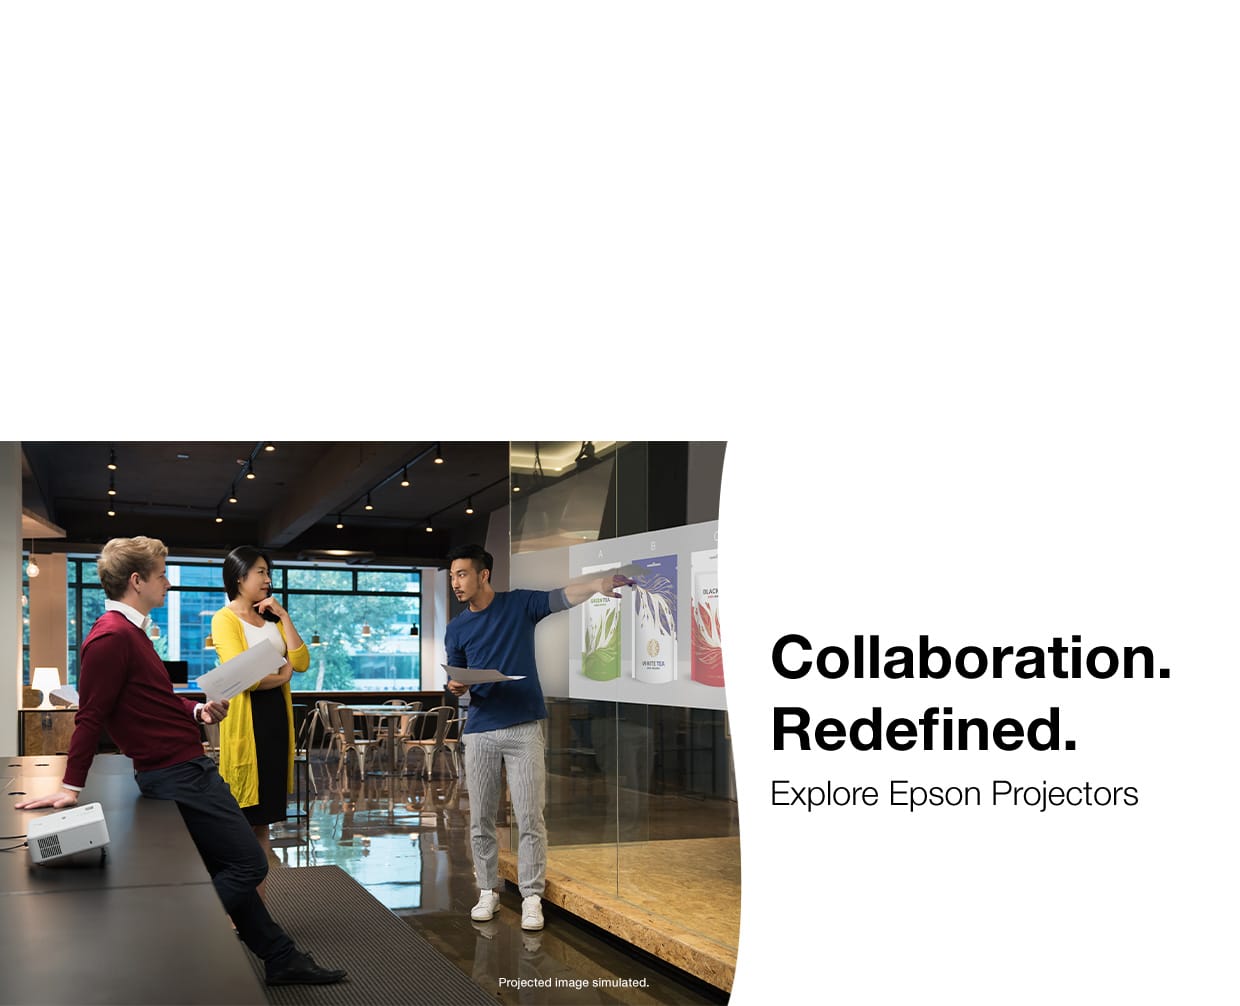 Collaboration. Redefined